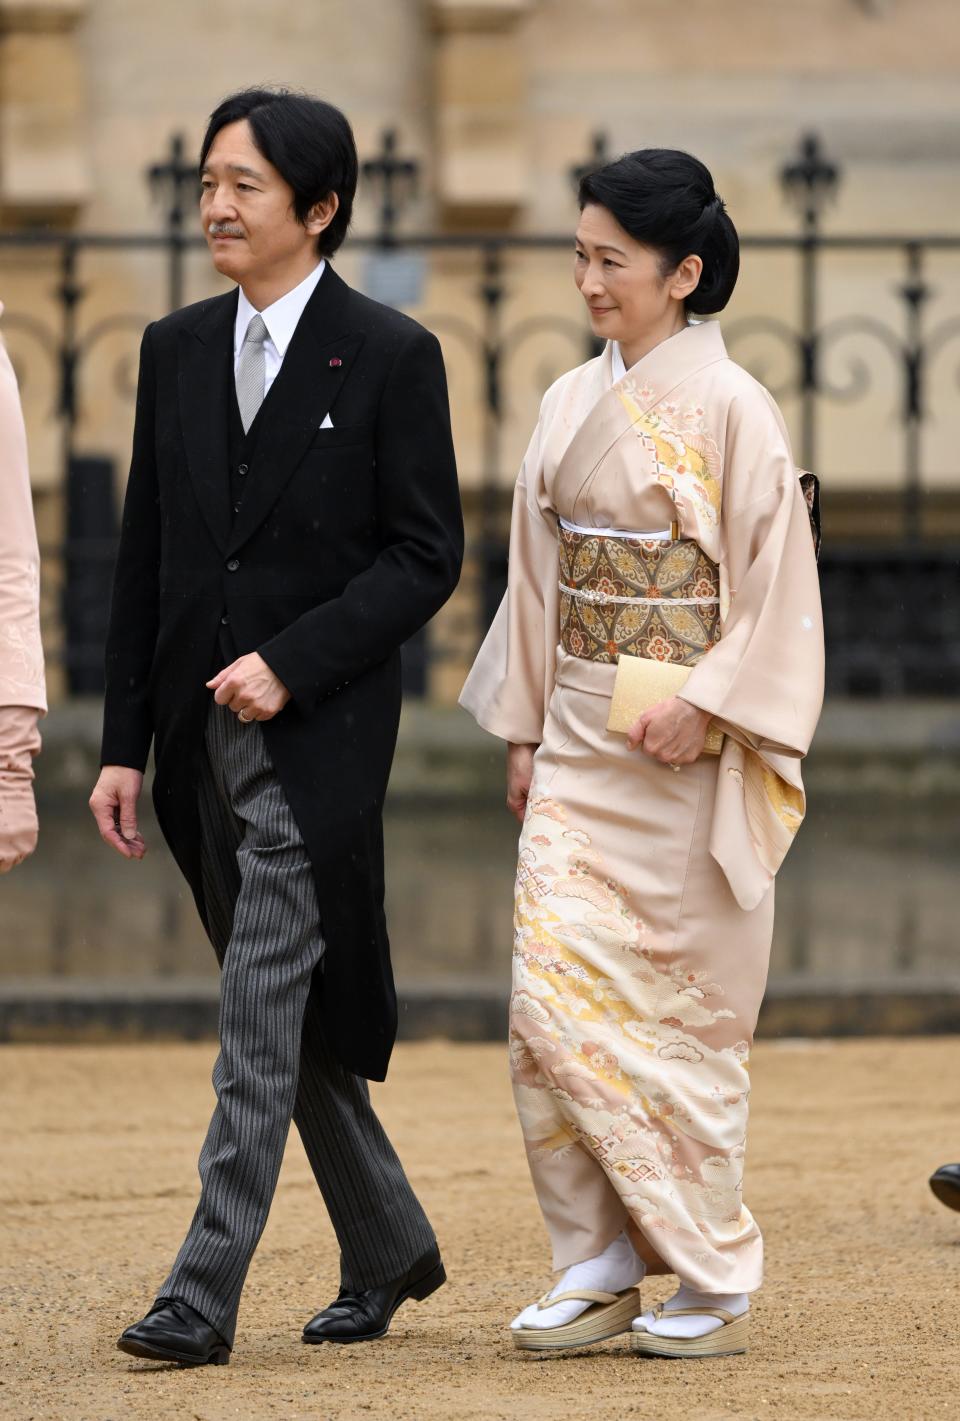 Crown Prince Akishino of Japan and Crown Princess Kiko of Japan arrive at Westminster Abbey for the Coronation of King Charles III and Queen Camilla on May 6, 2023 in London, England.